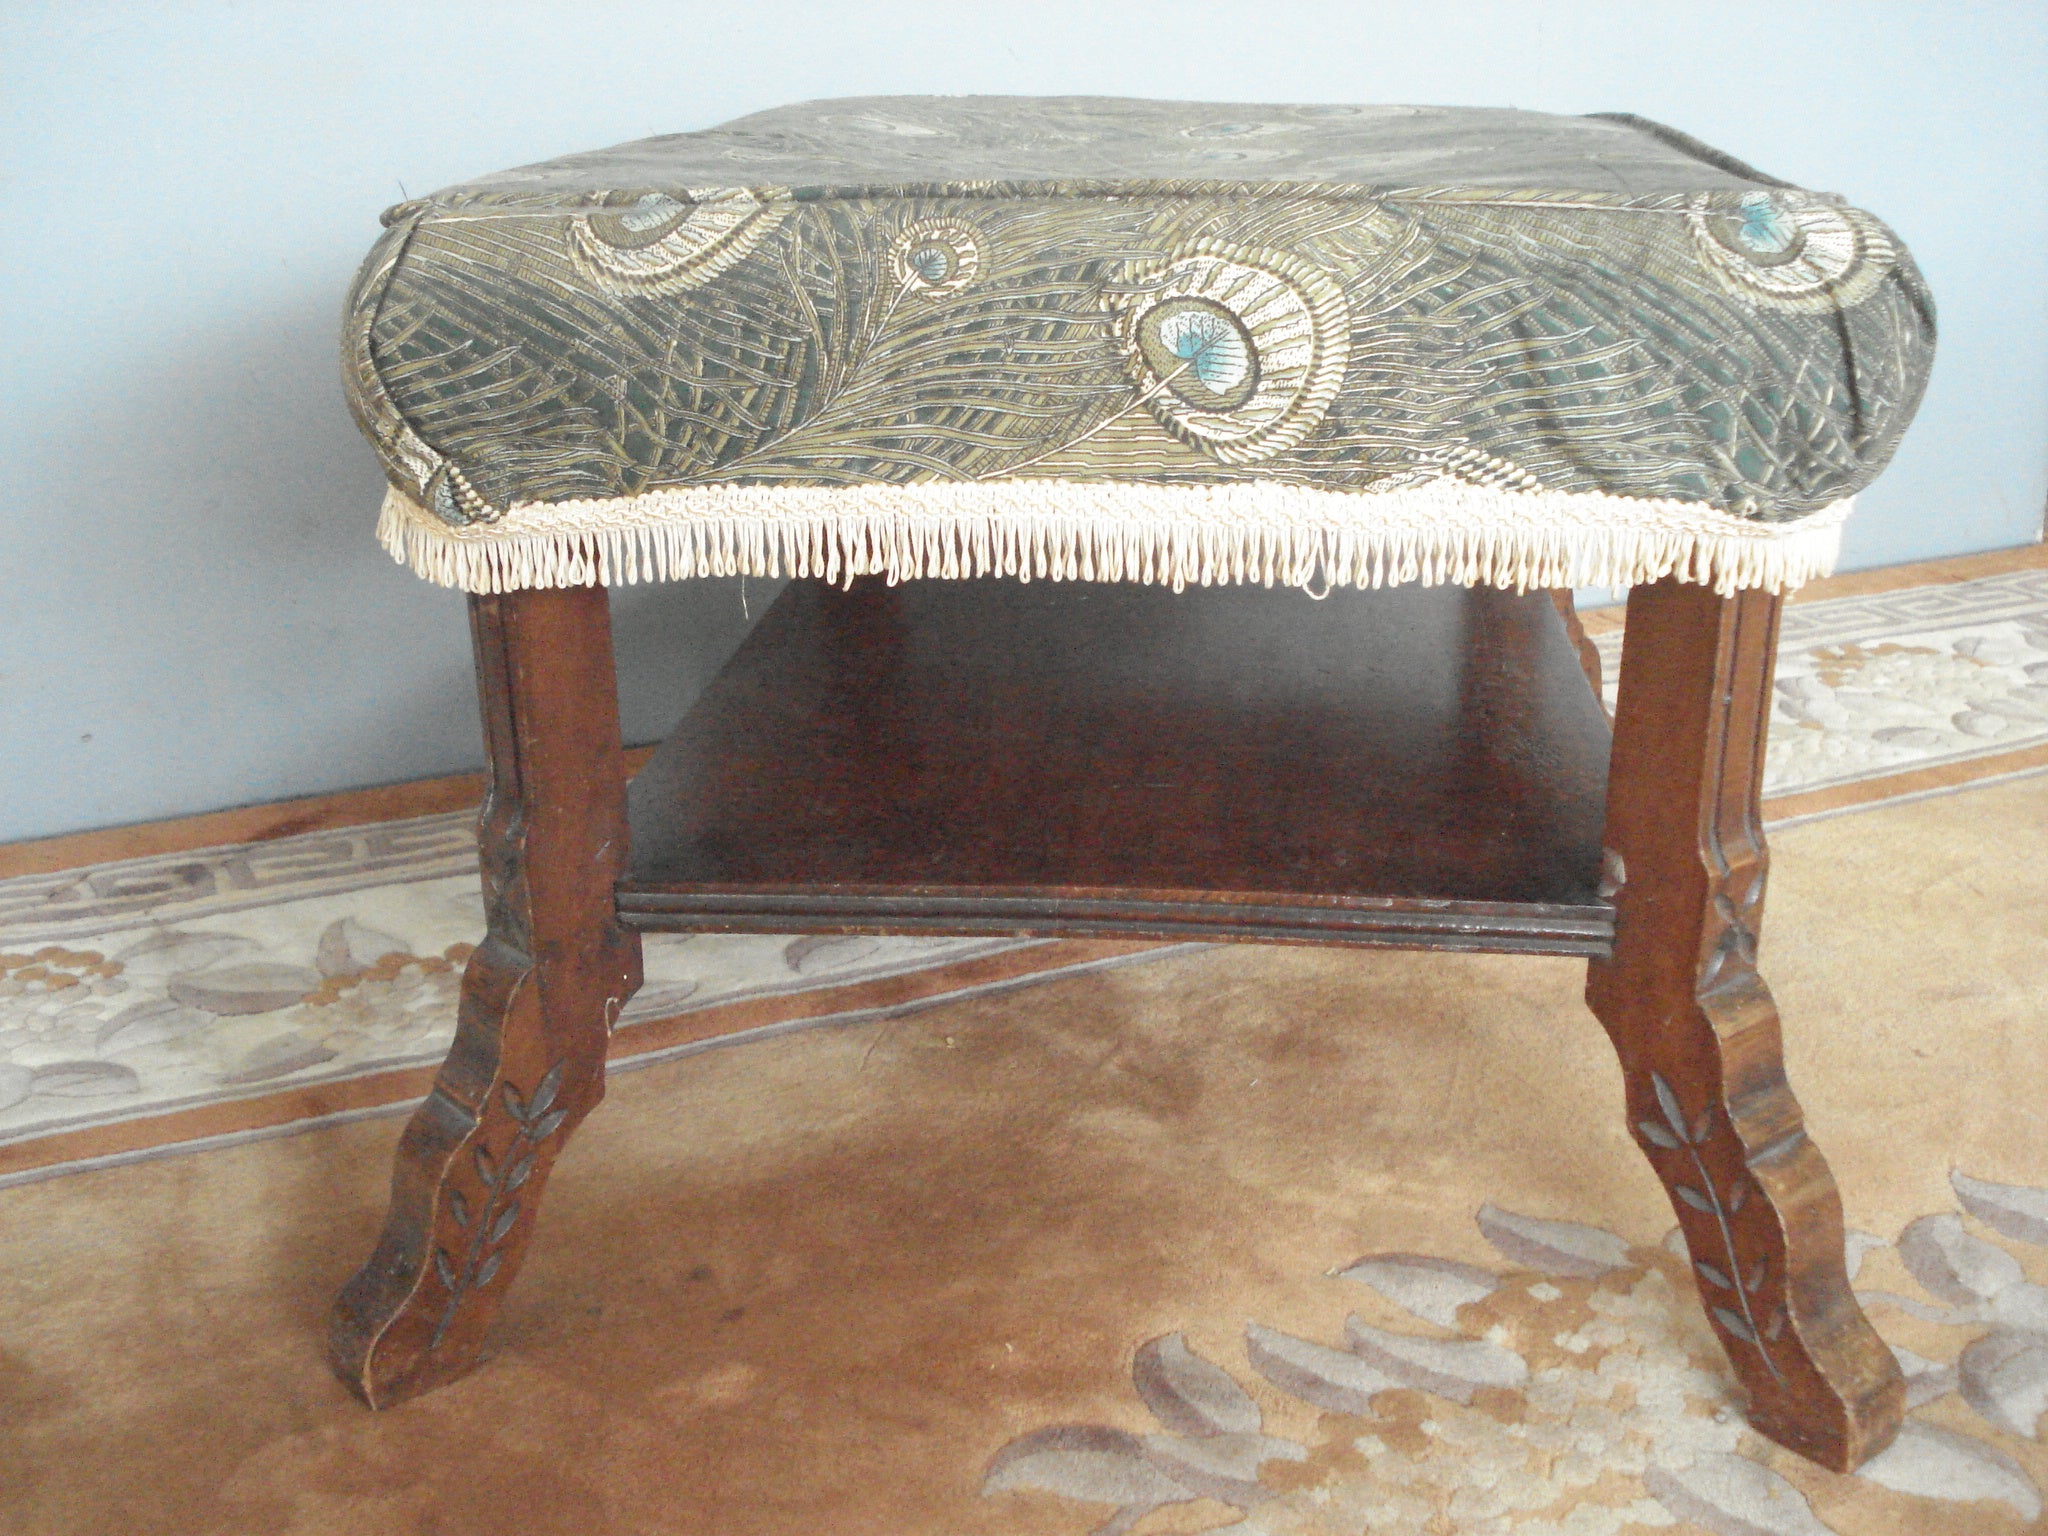 Upholstered Seat in Peacock Feather Design